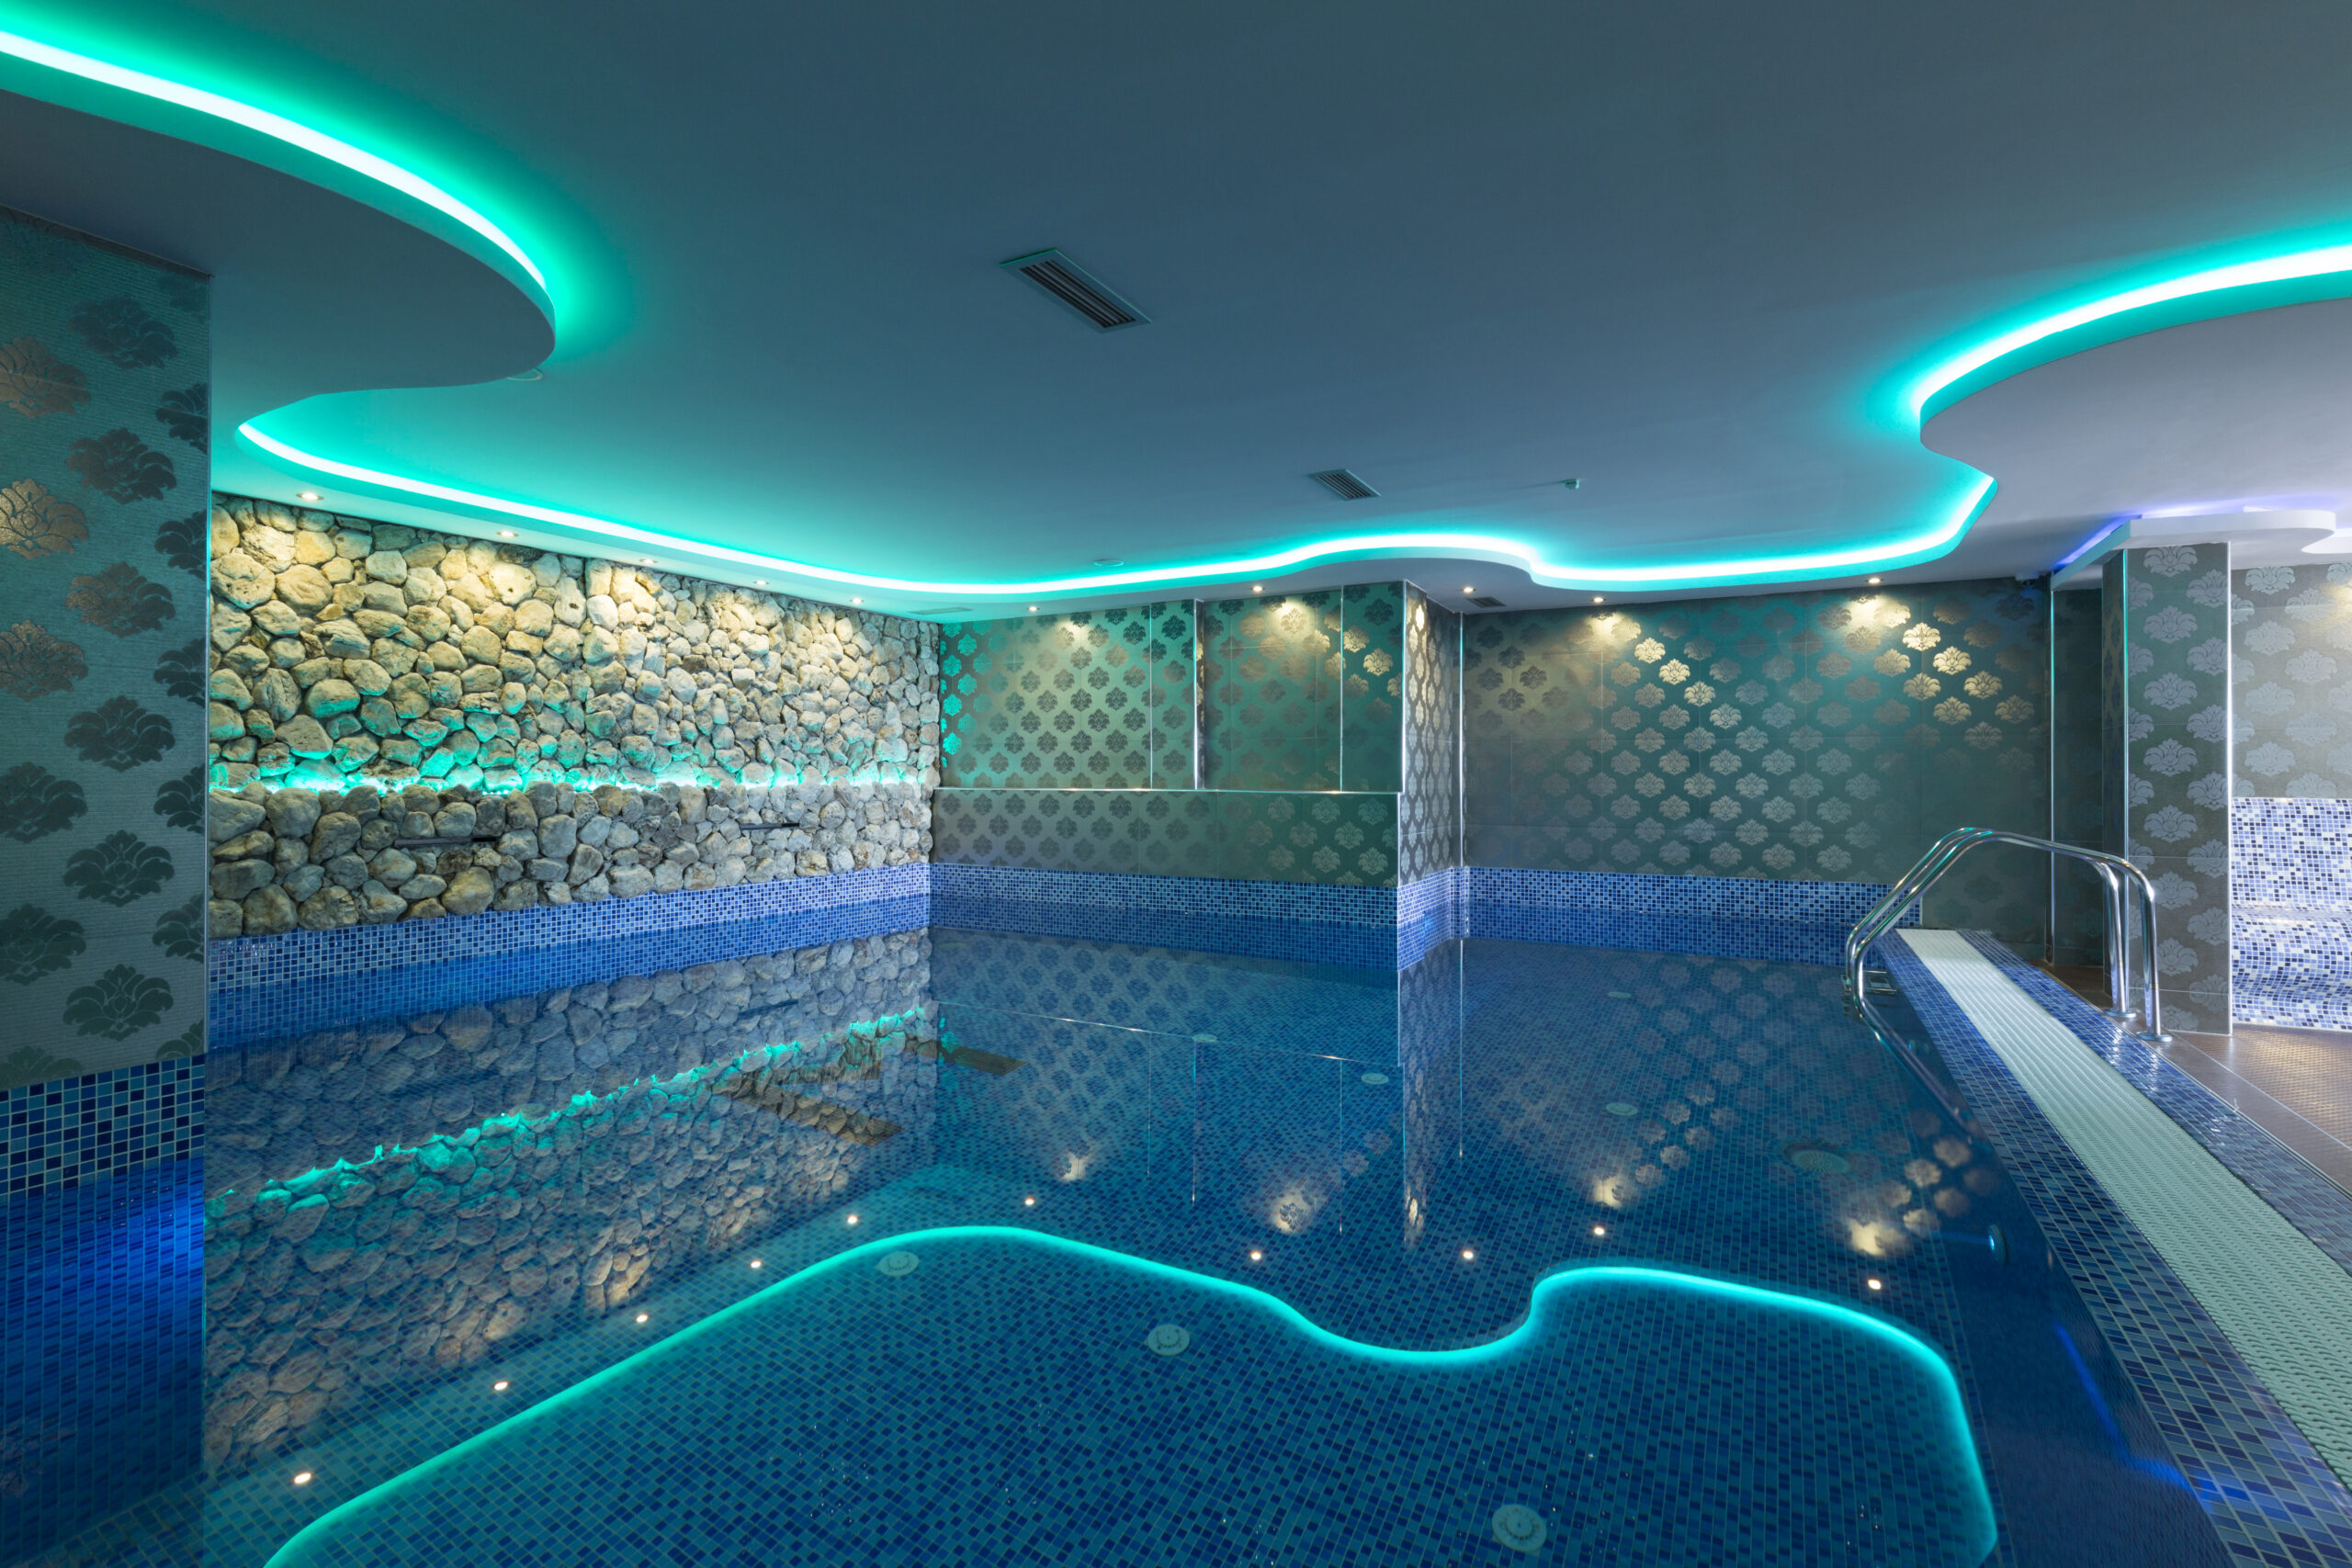 An indoor pool featuring both underwater and above-water lights, creating a visually stunning and inviting atmosphere.